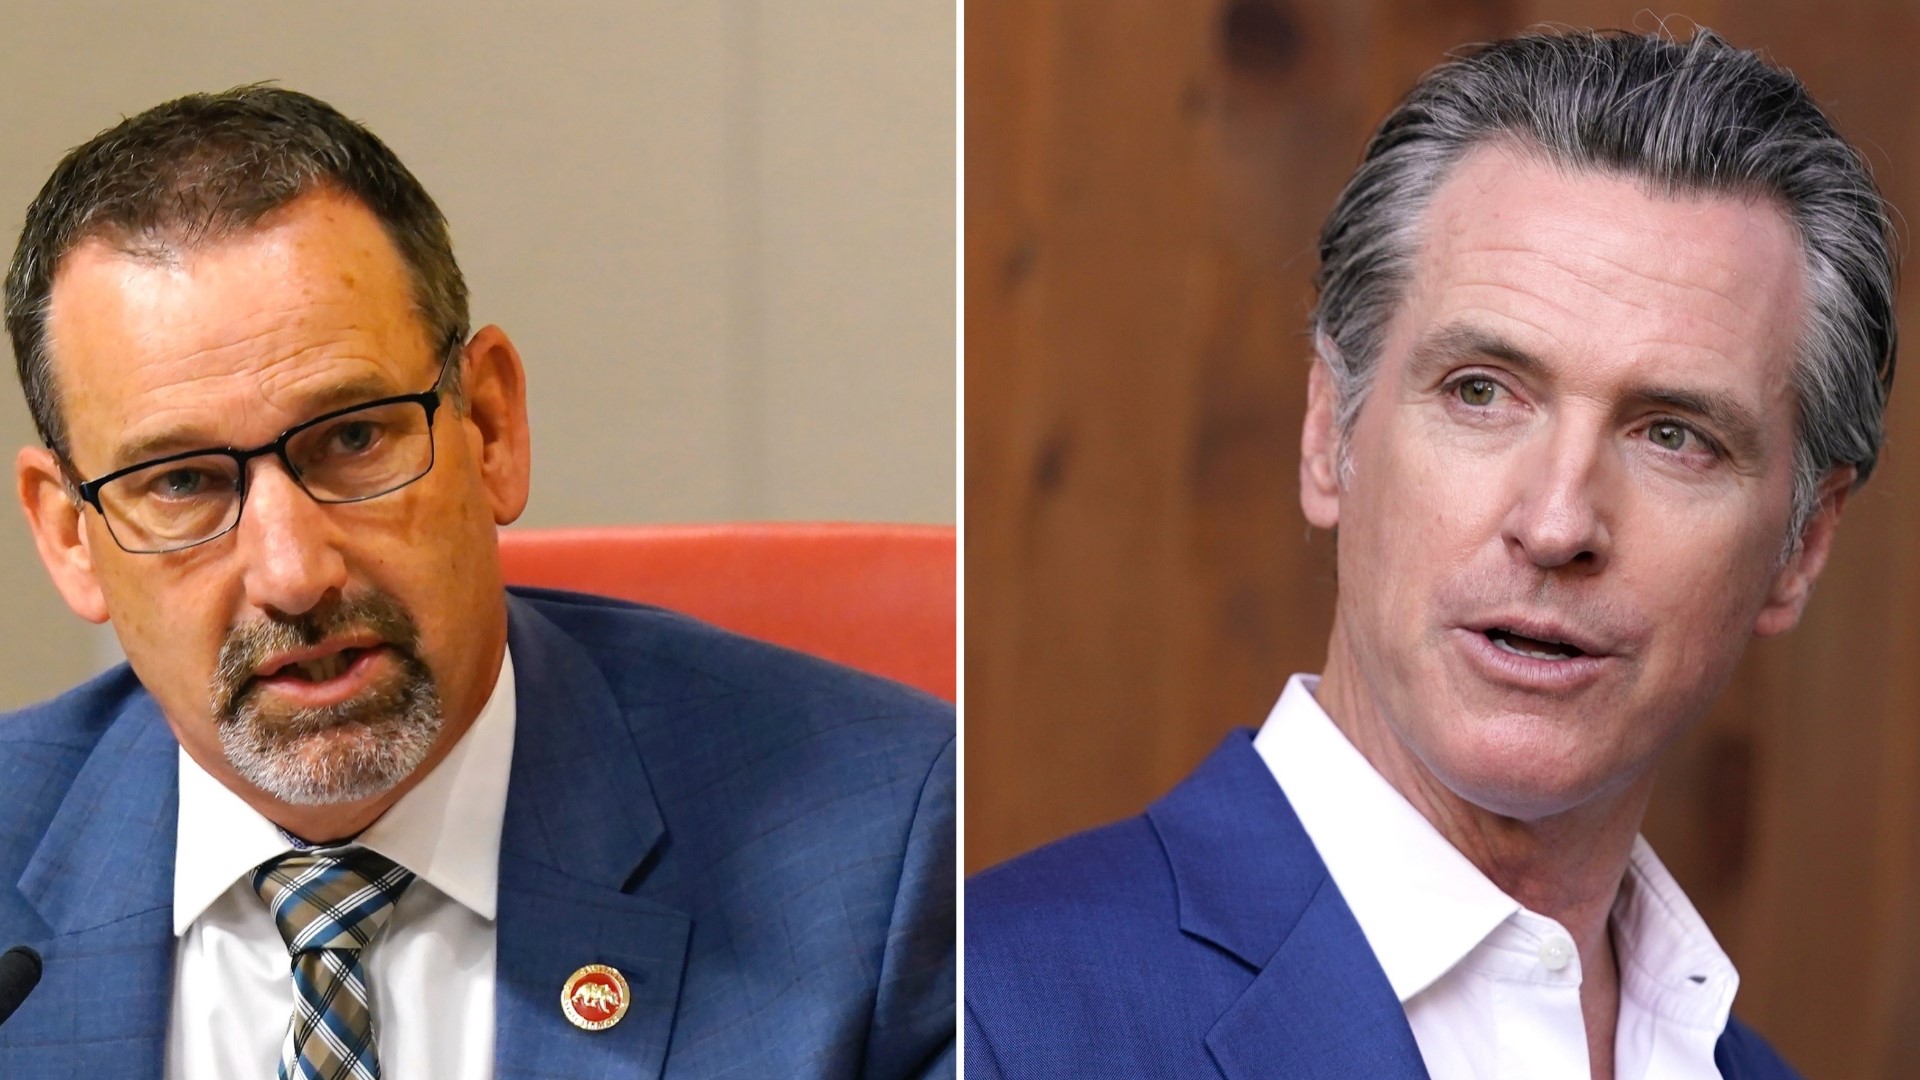 Gavin Newsom and Brian Dahle squared off in the only debate leading up to the 2022 election for Governor.